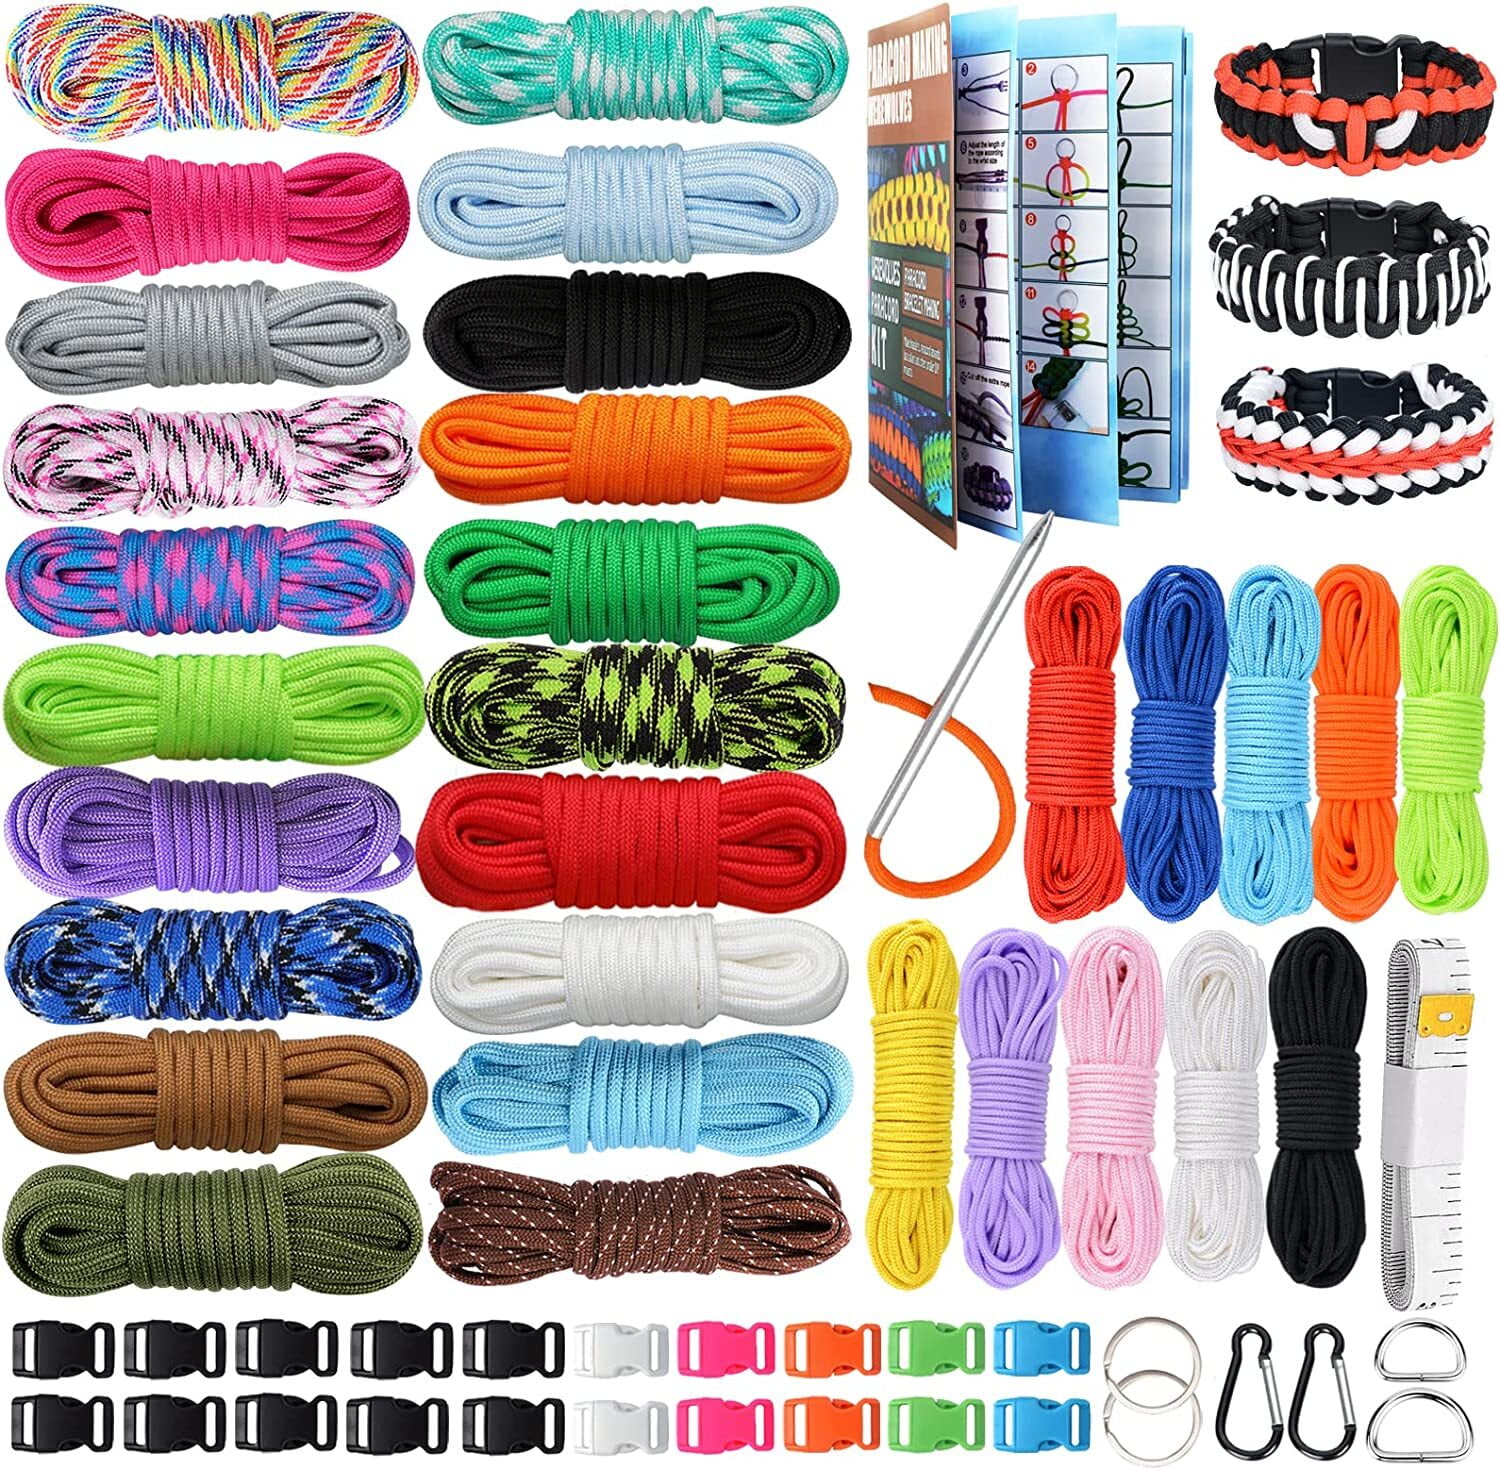  GeGeDa Paracord,Paracord 550 Combo Crafting Kits with 5 Types  Buckles,20 Feet Each Paracord Rope (Light Rainbow Set 200feet) (A-Set) :  Sports & Outdoors